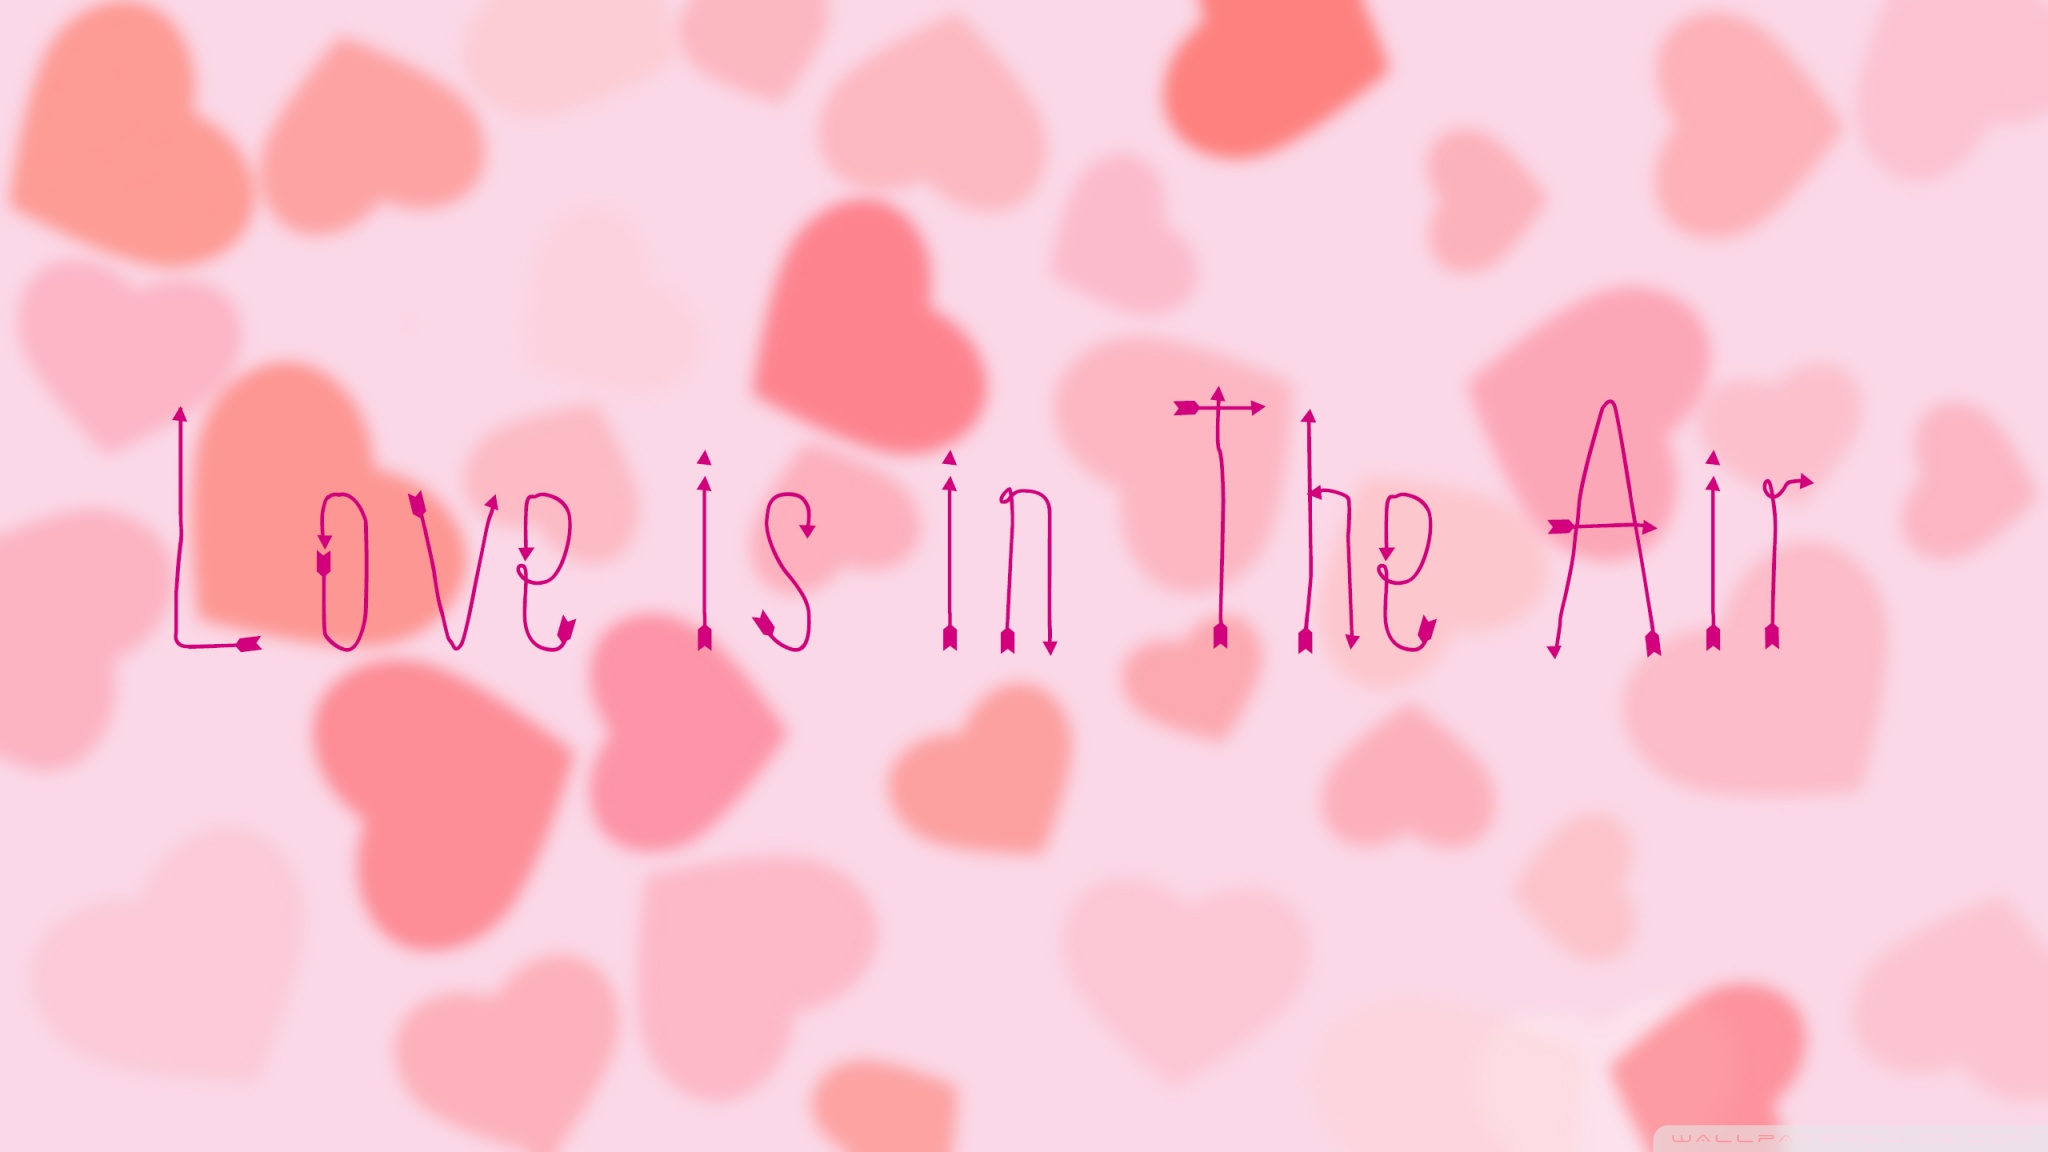 Download Love is in the Air UltraHD Free Wallpaper.